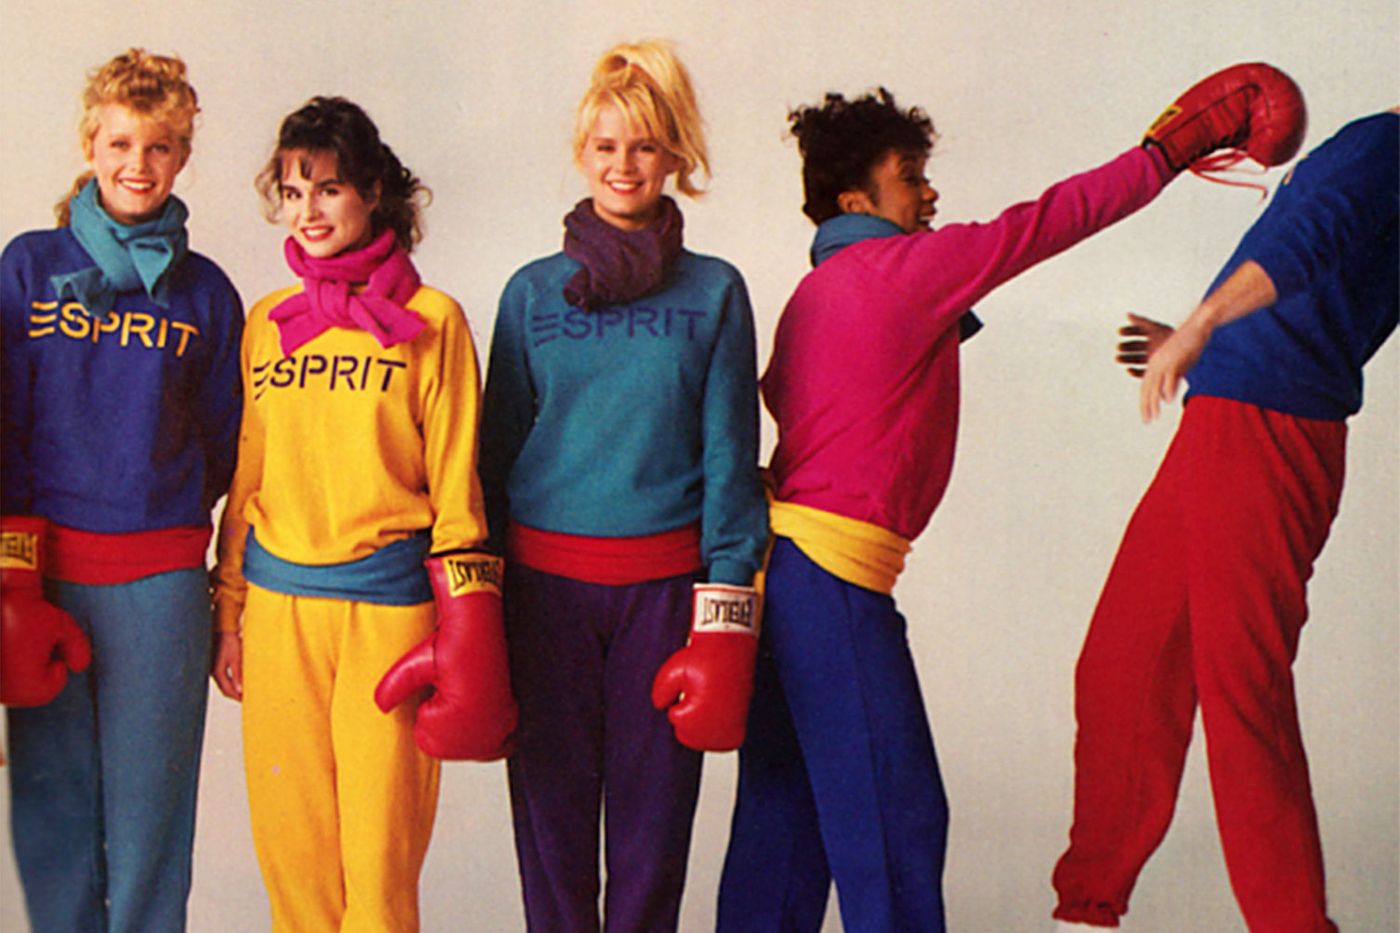 90's ad for Esprit with teenagers with solid colored sweatshirts with ESPRIT written on them